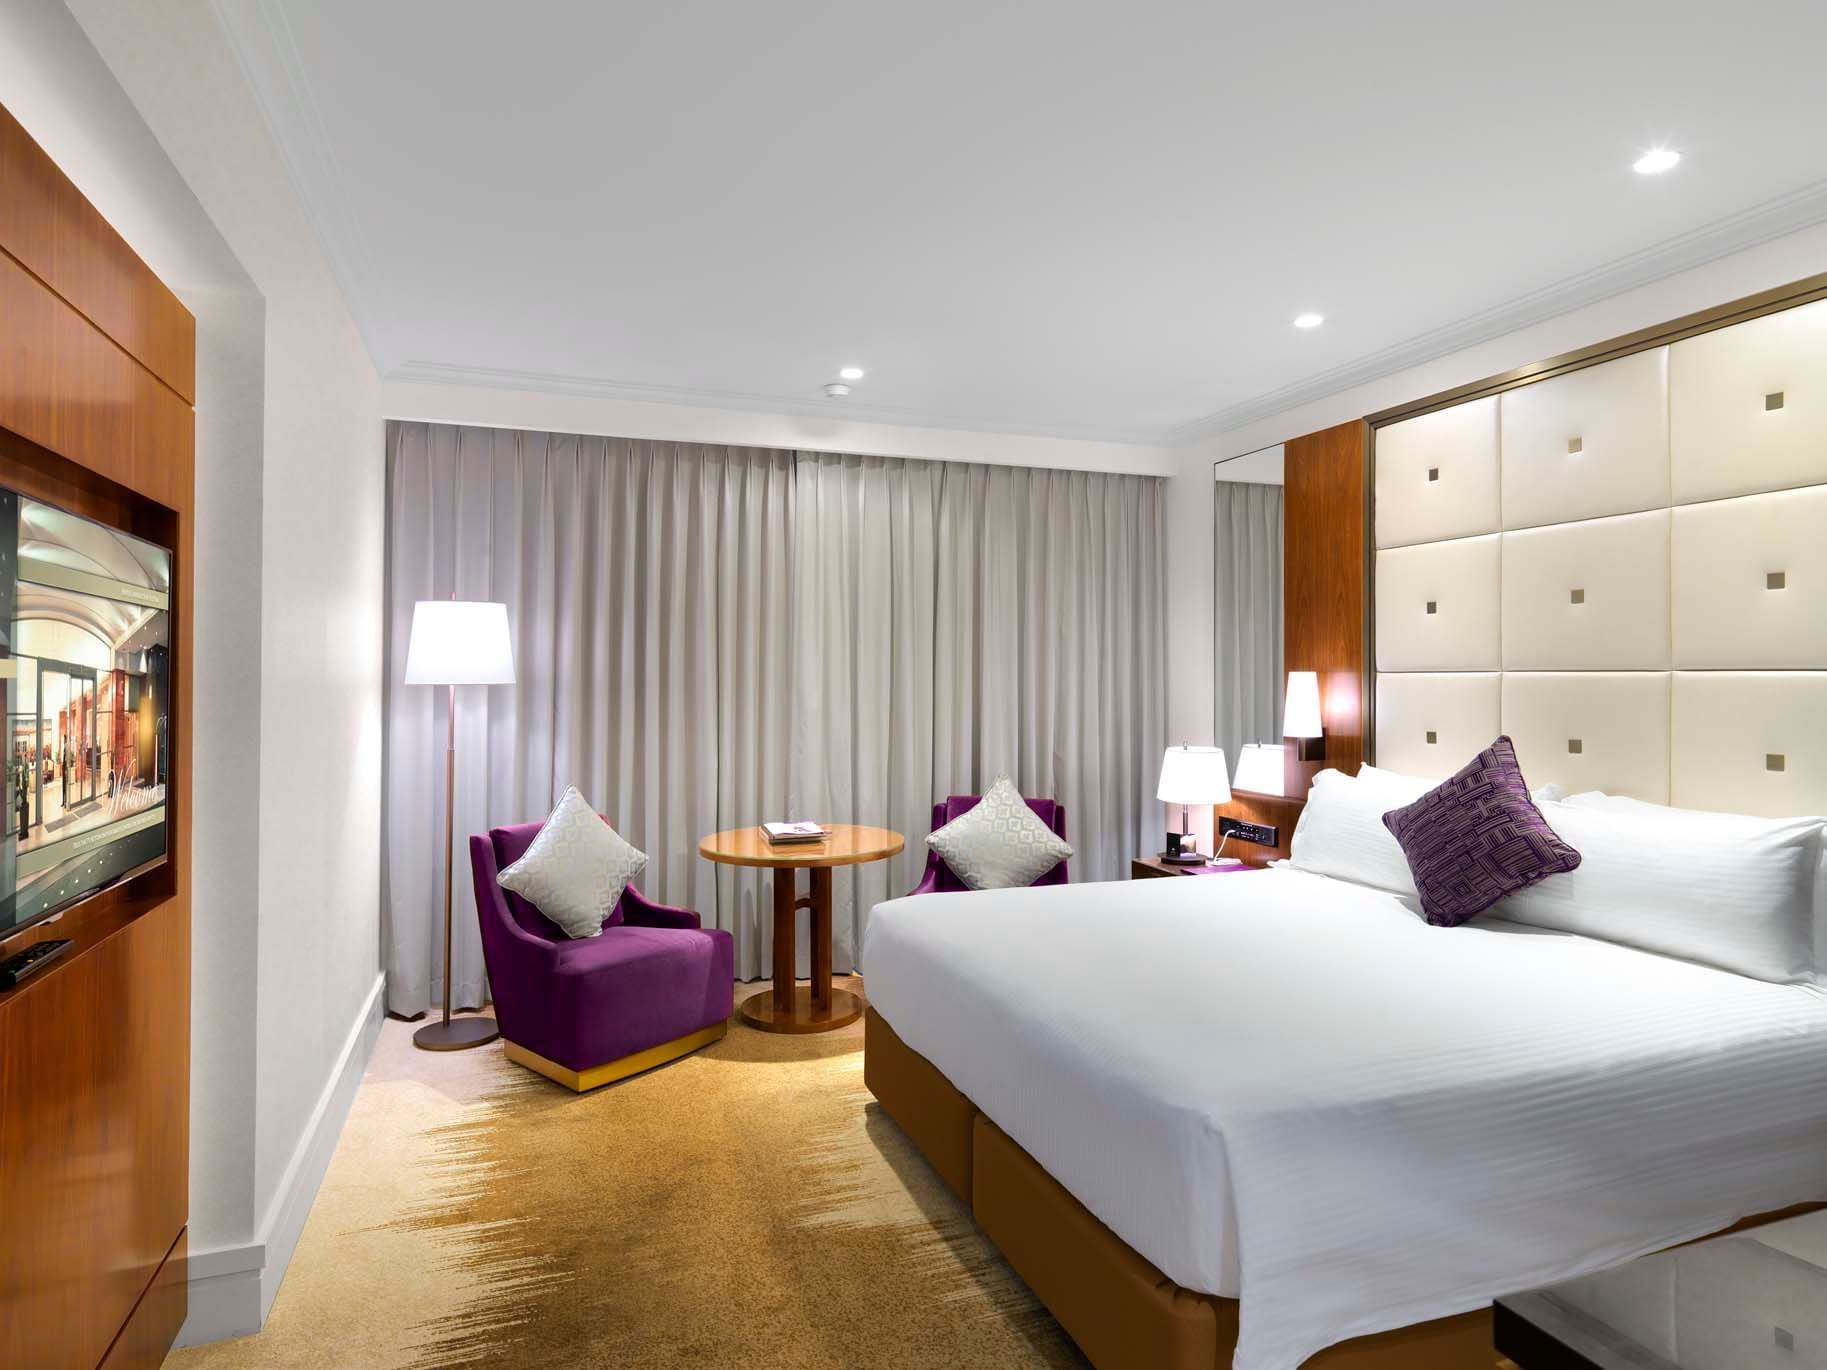 Bed & lounge in Deluxe Tower King Room at Amora Hotel Sydney